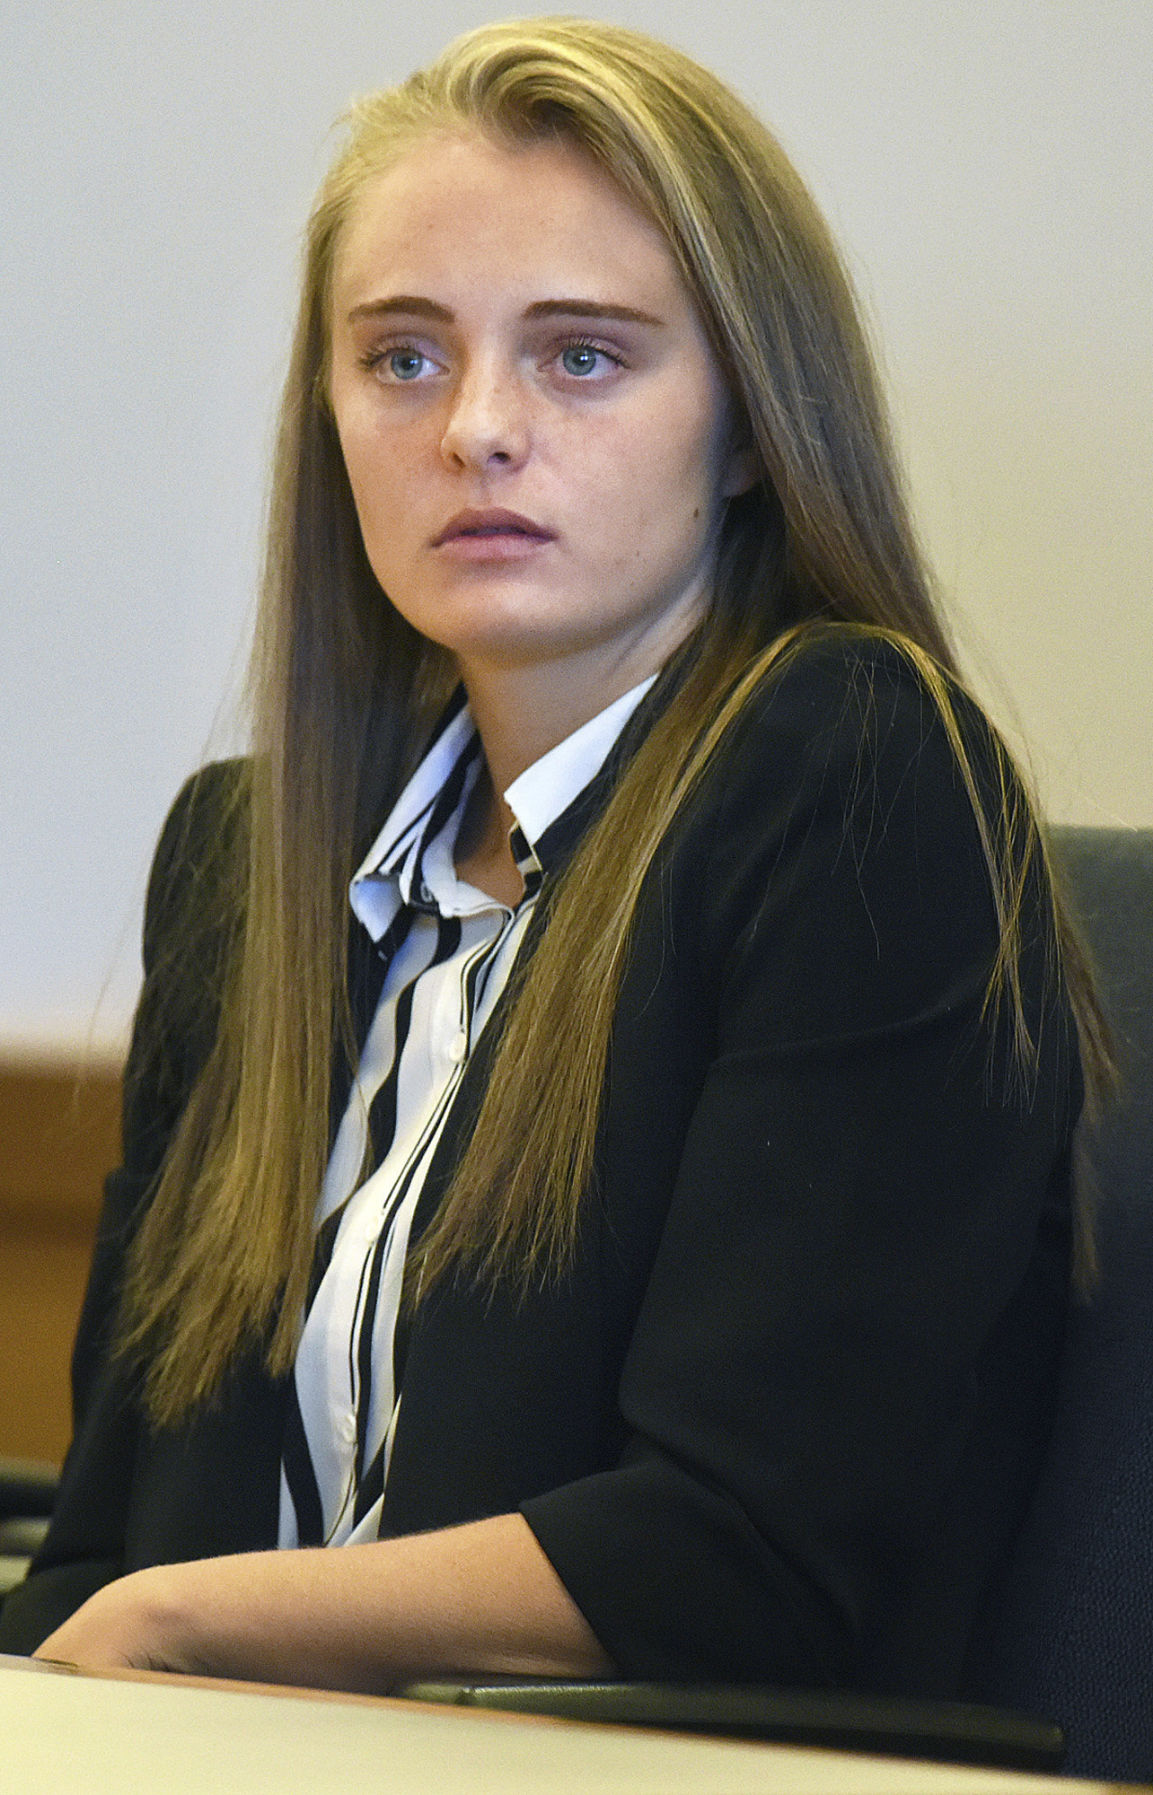 Judge sets Michelle Carter trial date for March 6 | Local News | thesunchronicle.com